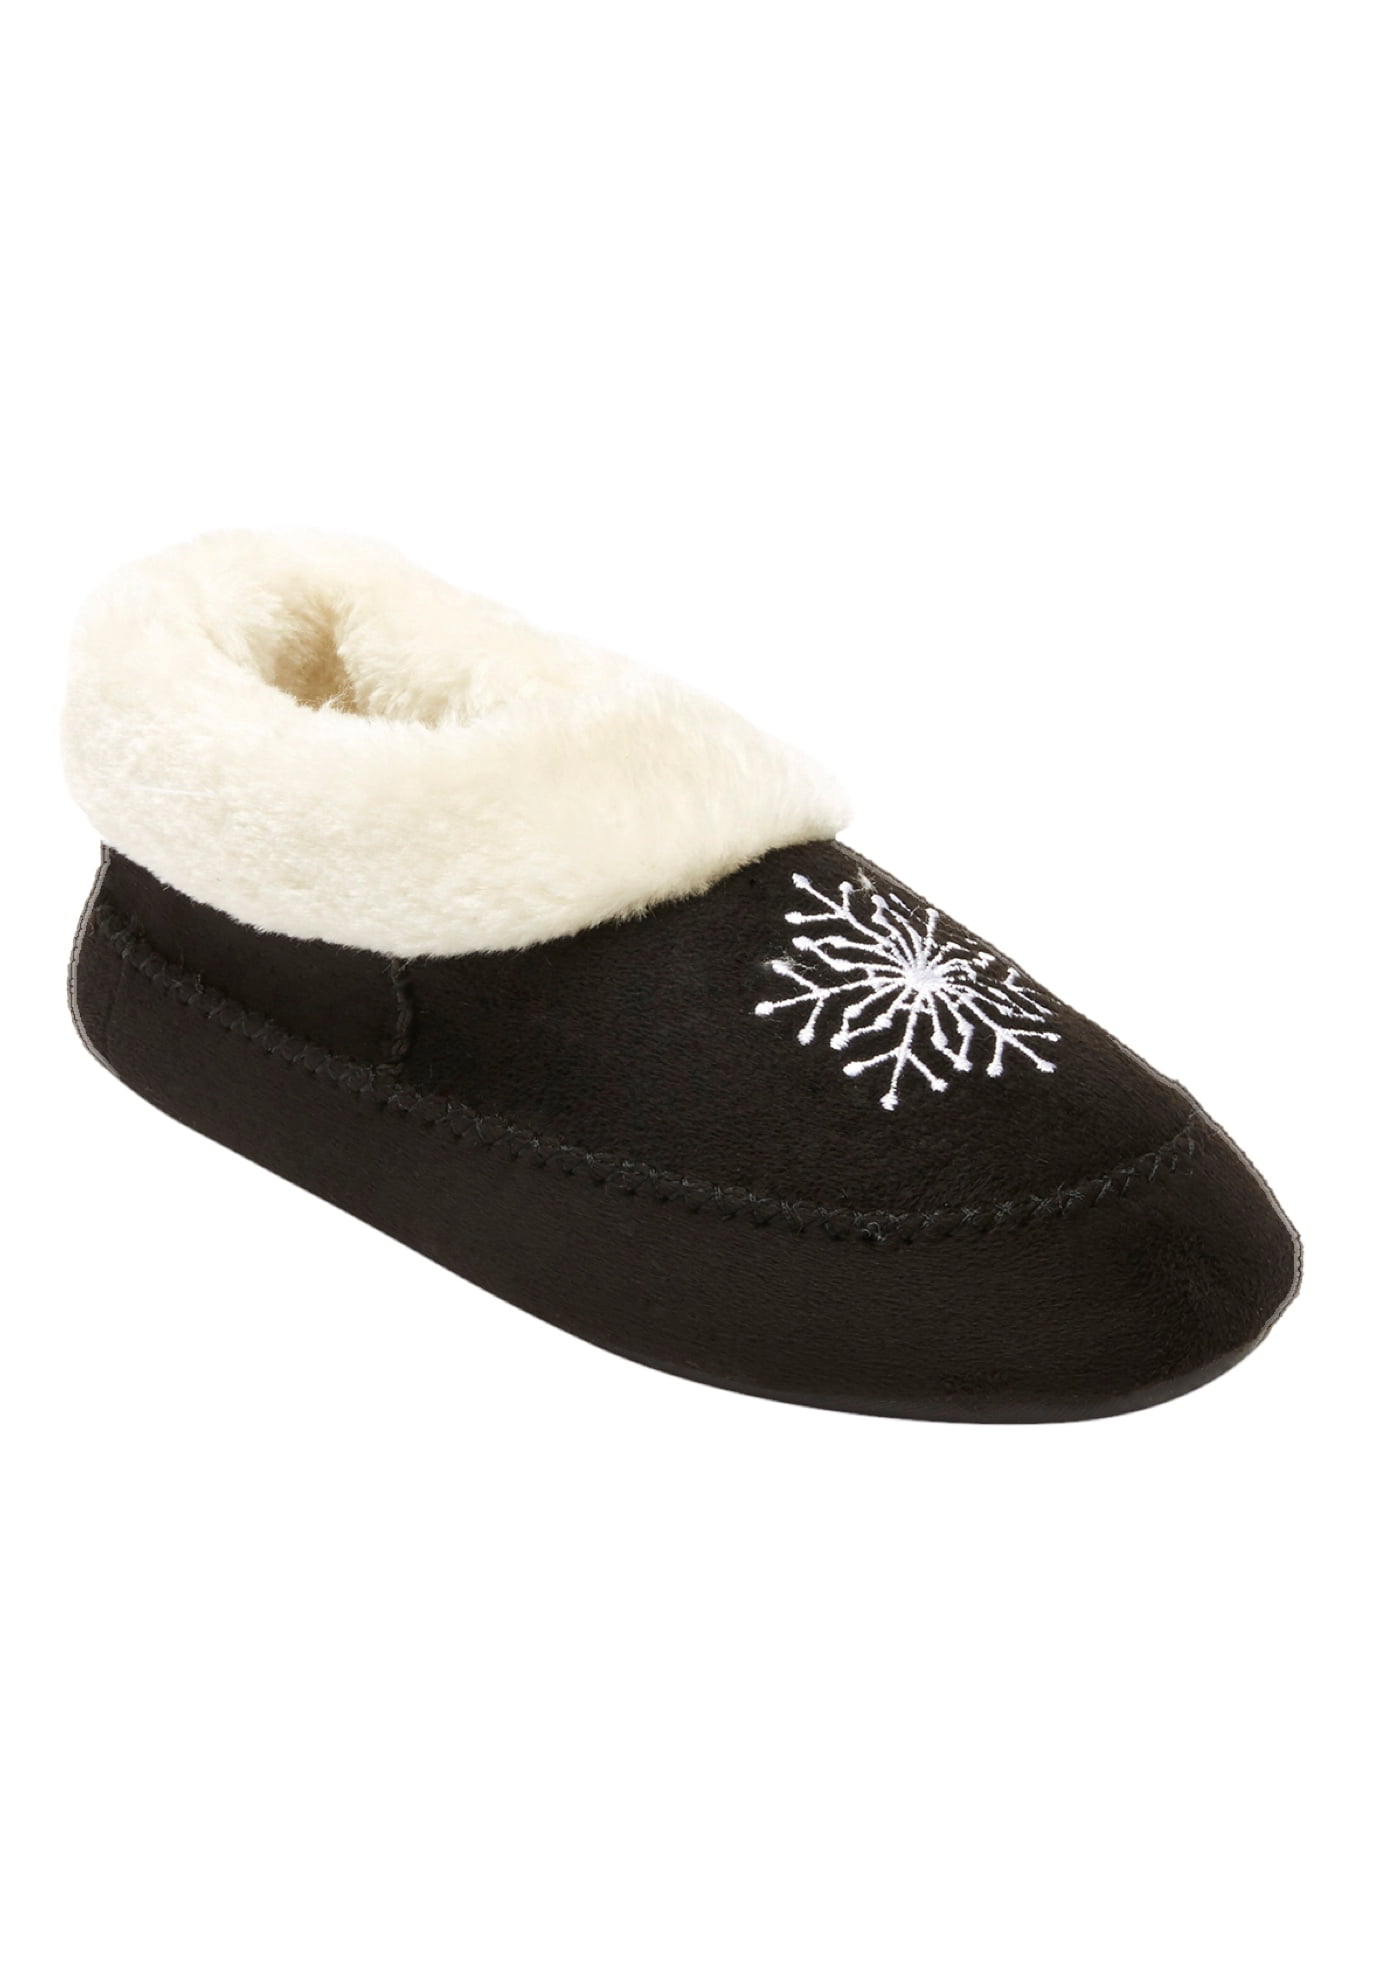 NEW Ladies Jyoti Slippers Mules House Shoes Various Sizes 3-8 UK 